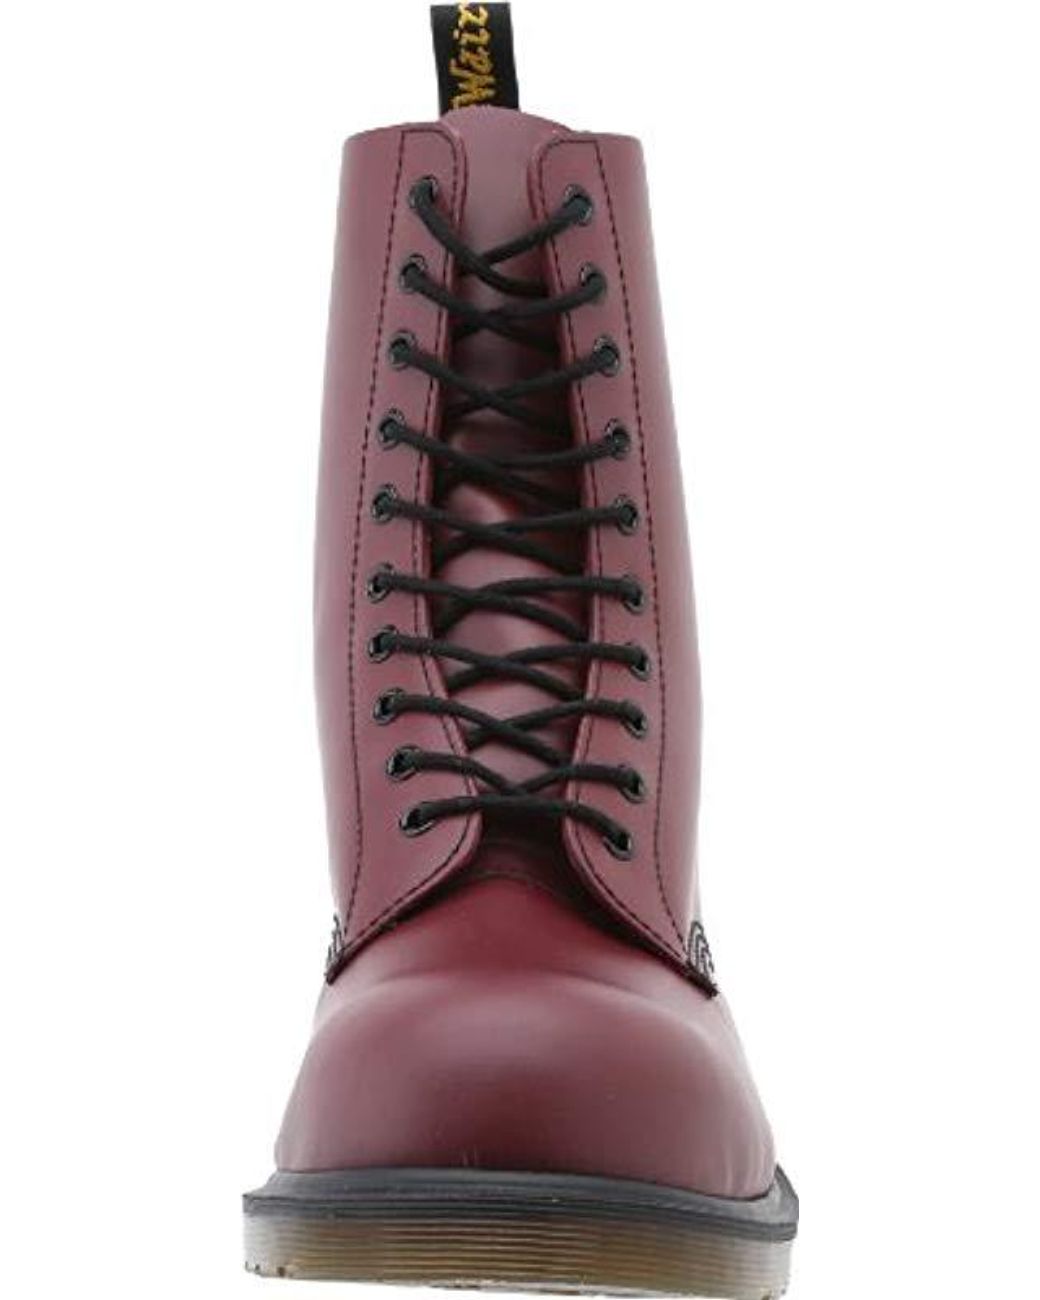 Dr. Martens 1919 Unisex Steel Toe Leather Boot in Red | Lyst